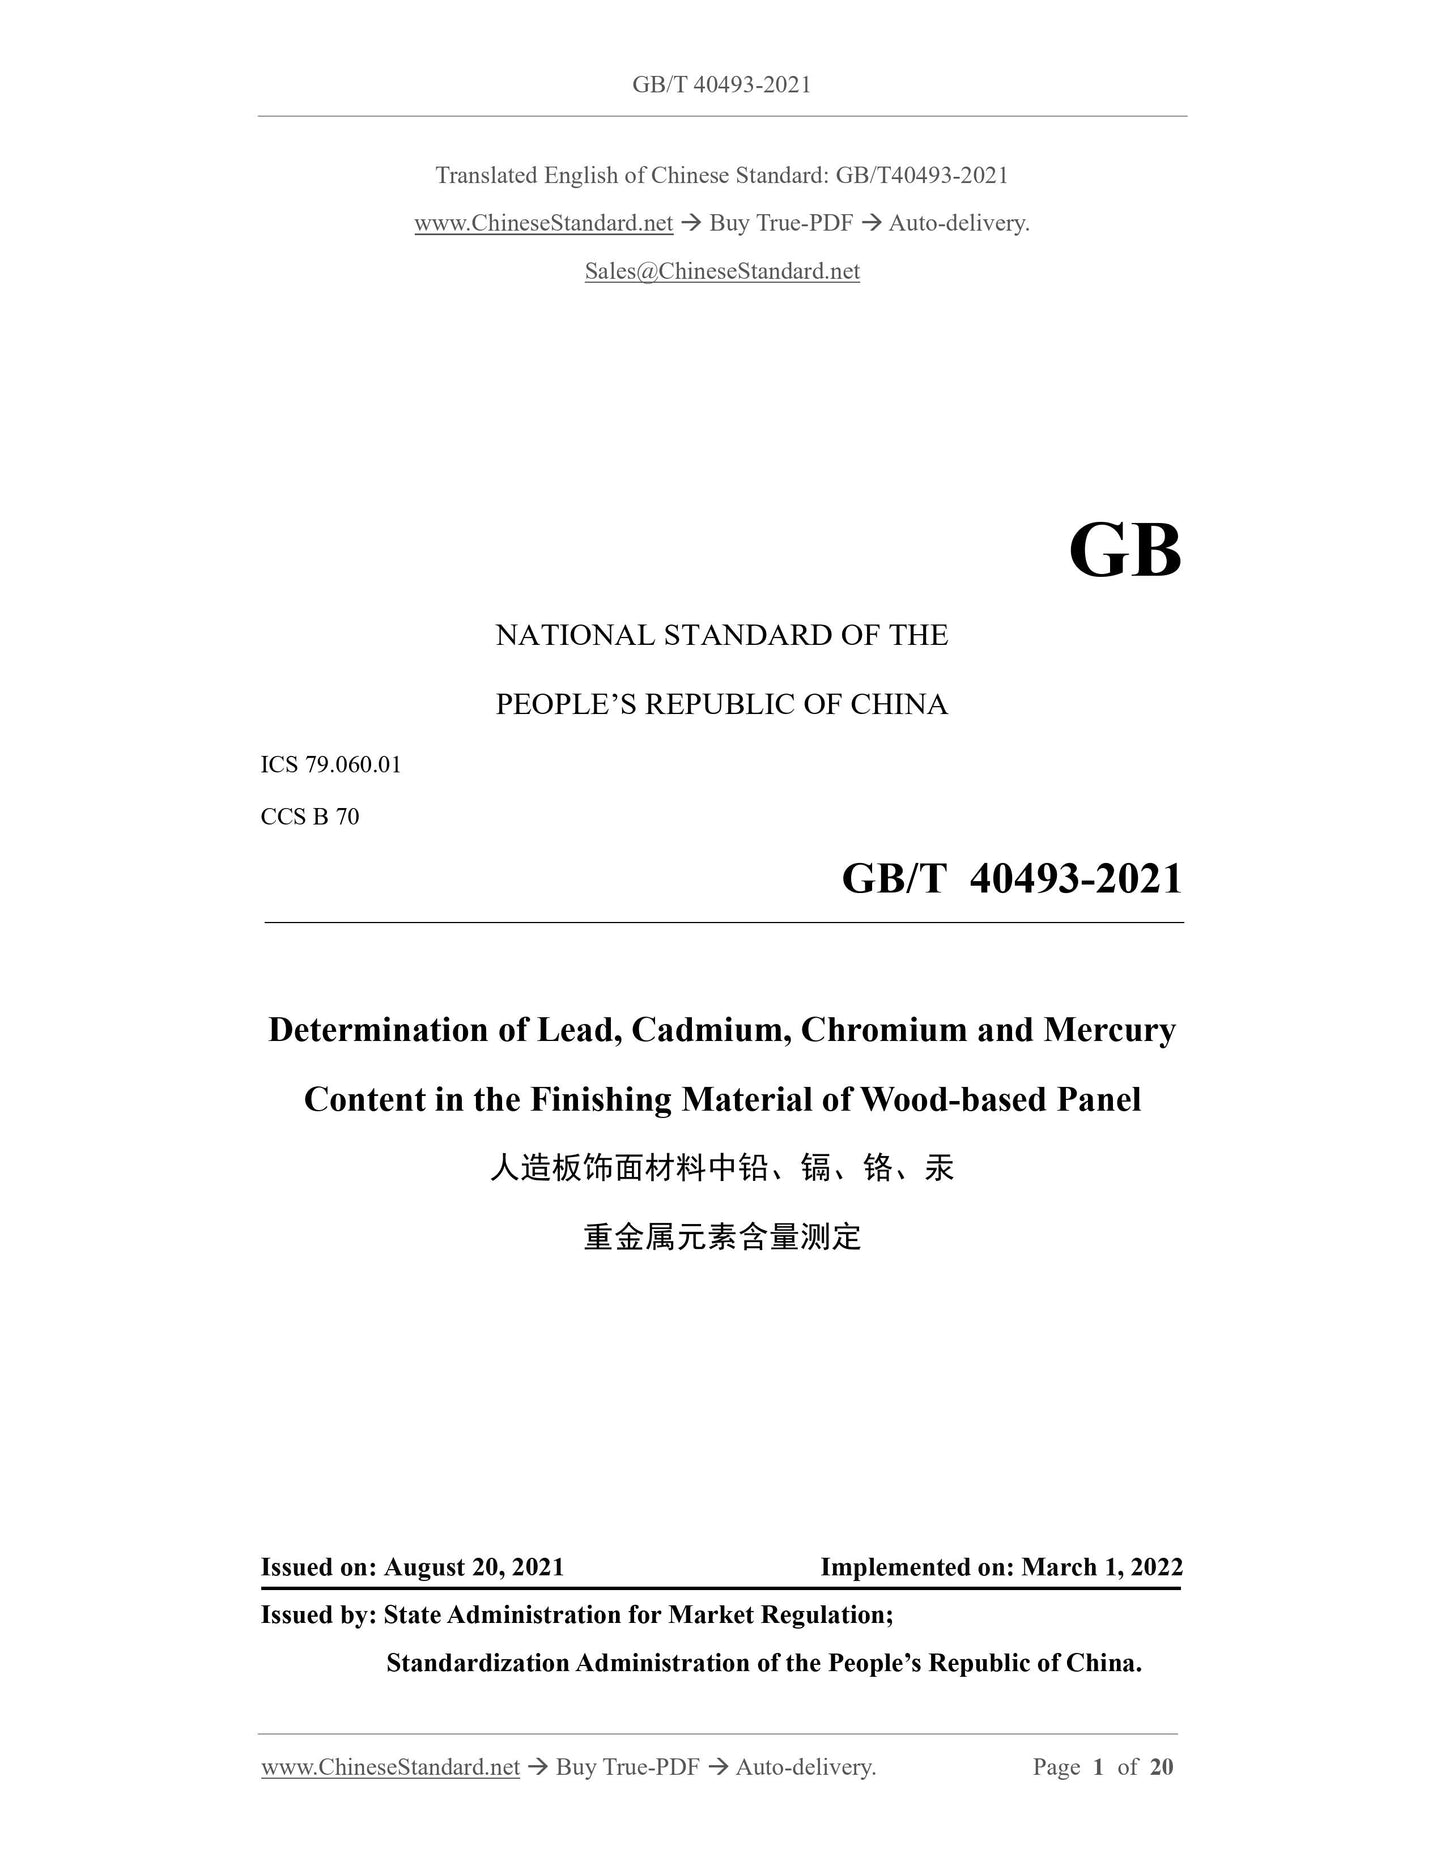 GB/T 40493-2021 Page 1